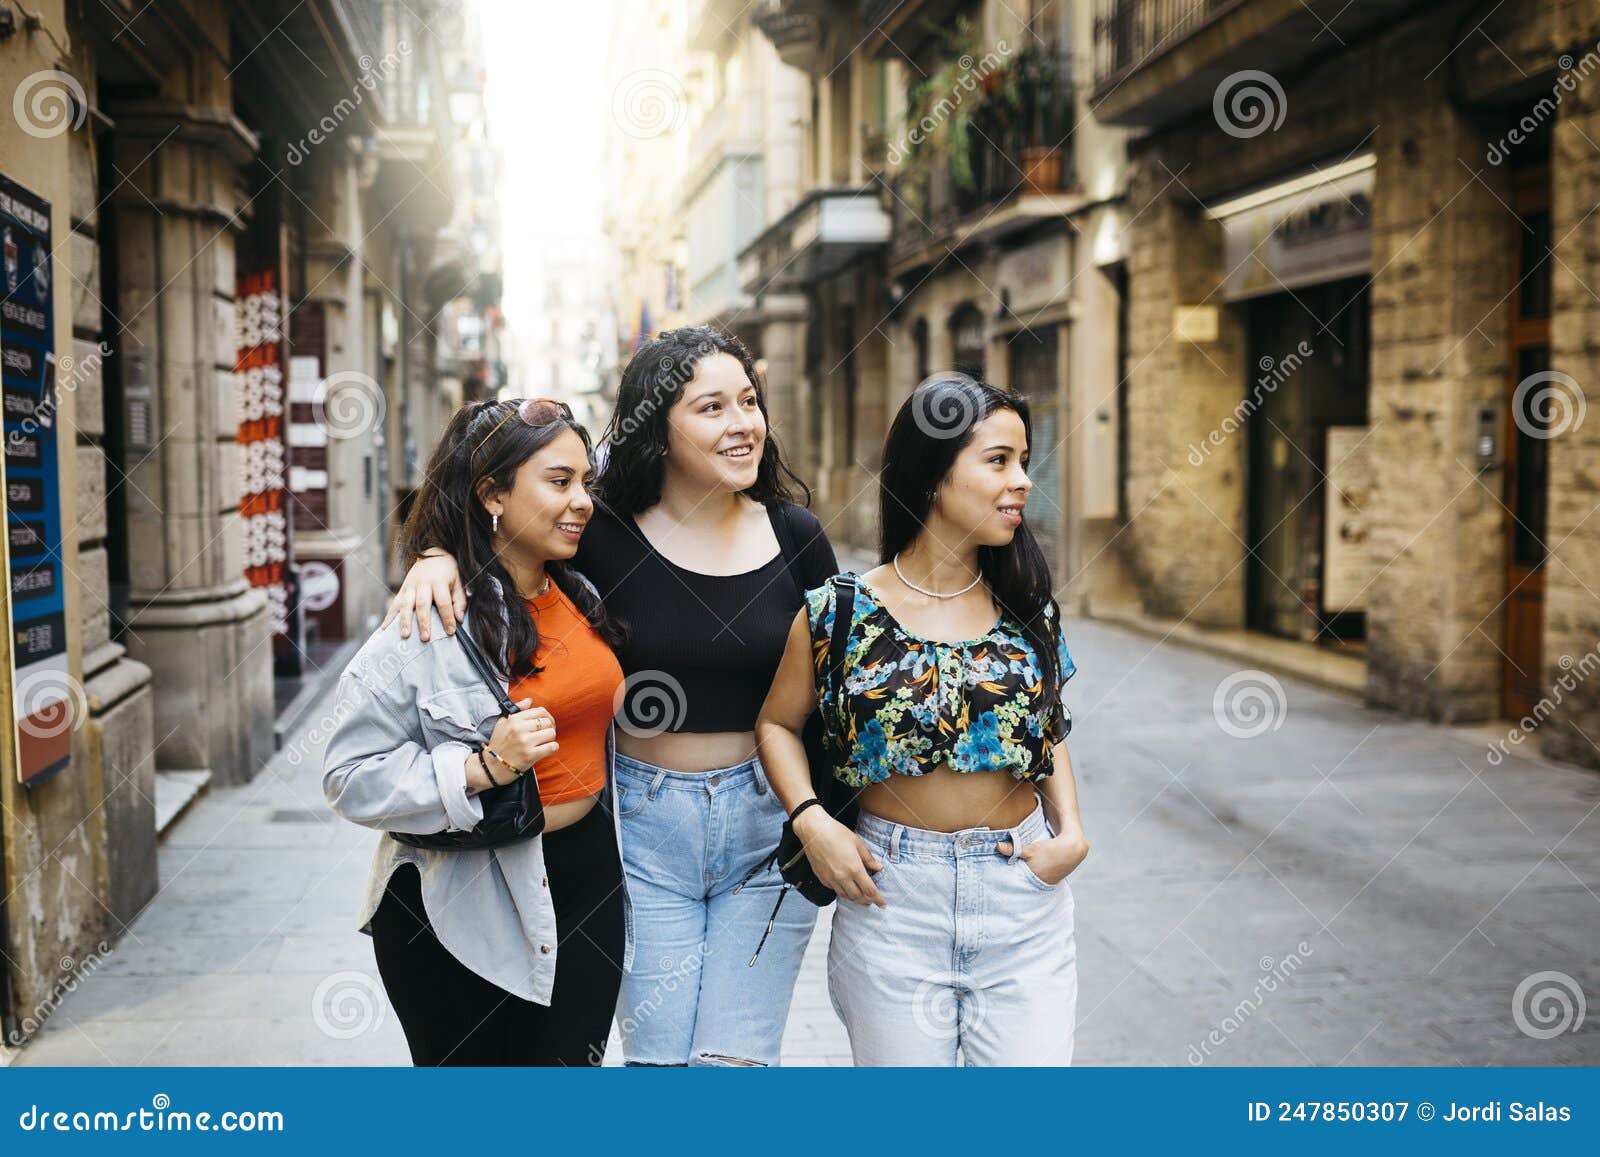 women hanging out on a comercial street